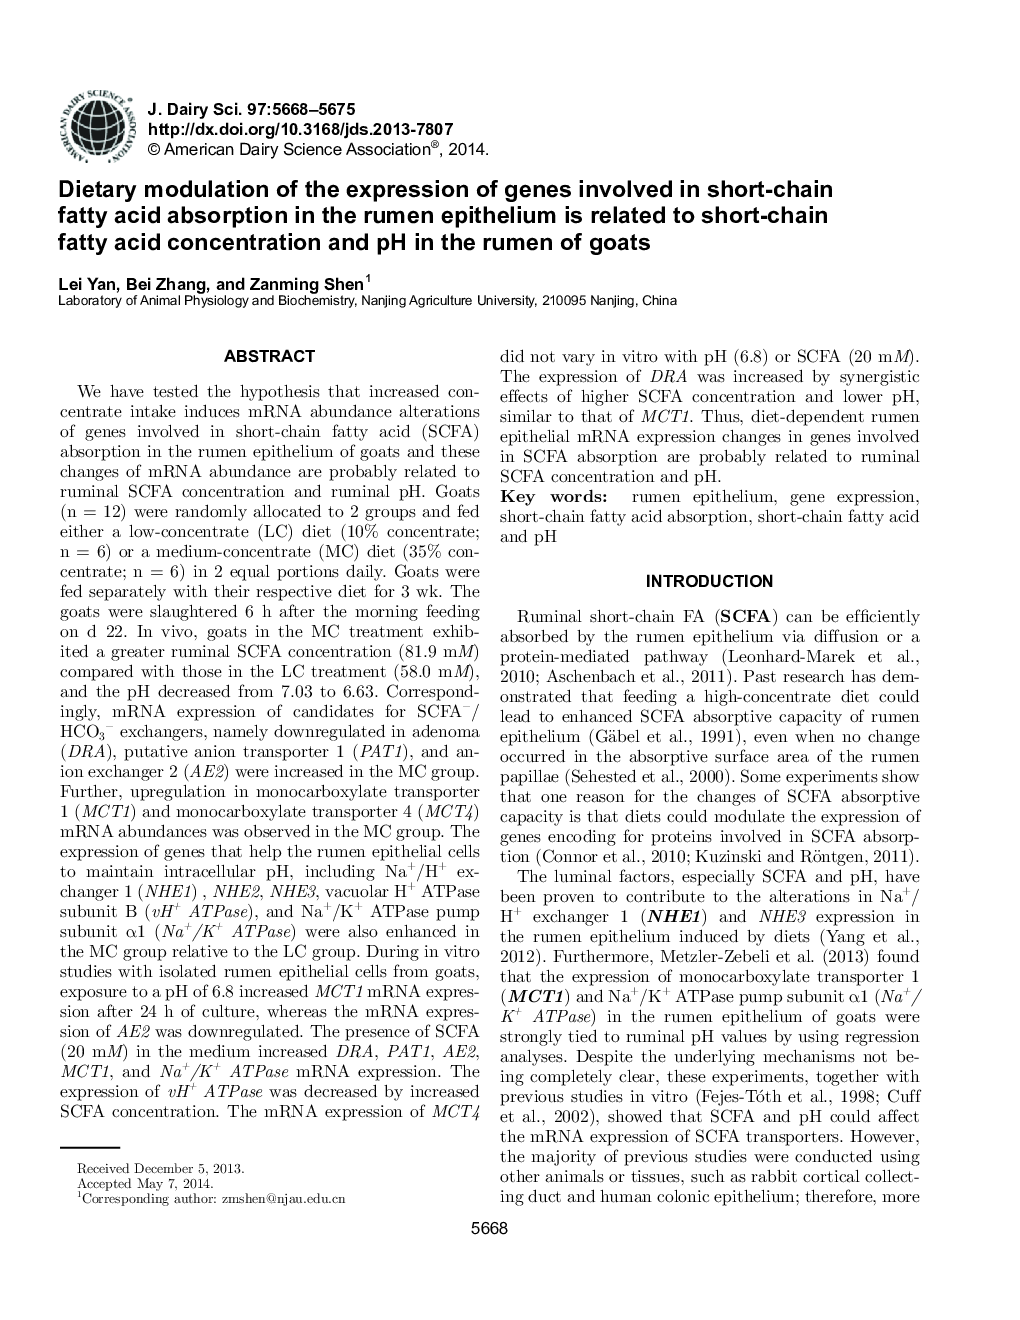 Dietary modulation of the expression of genes involved in short-chain fatty acid absorption in the rumen epithelium is related to short-chain fatty acid concentration and pH in the rumen of goats